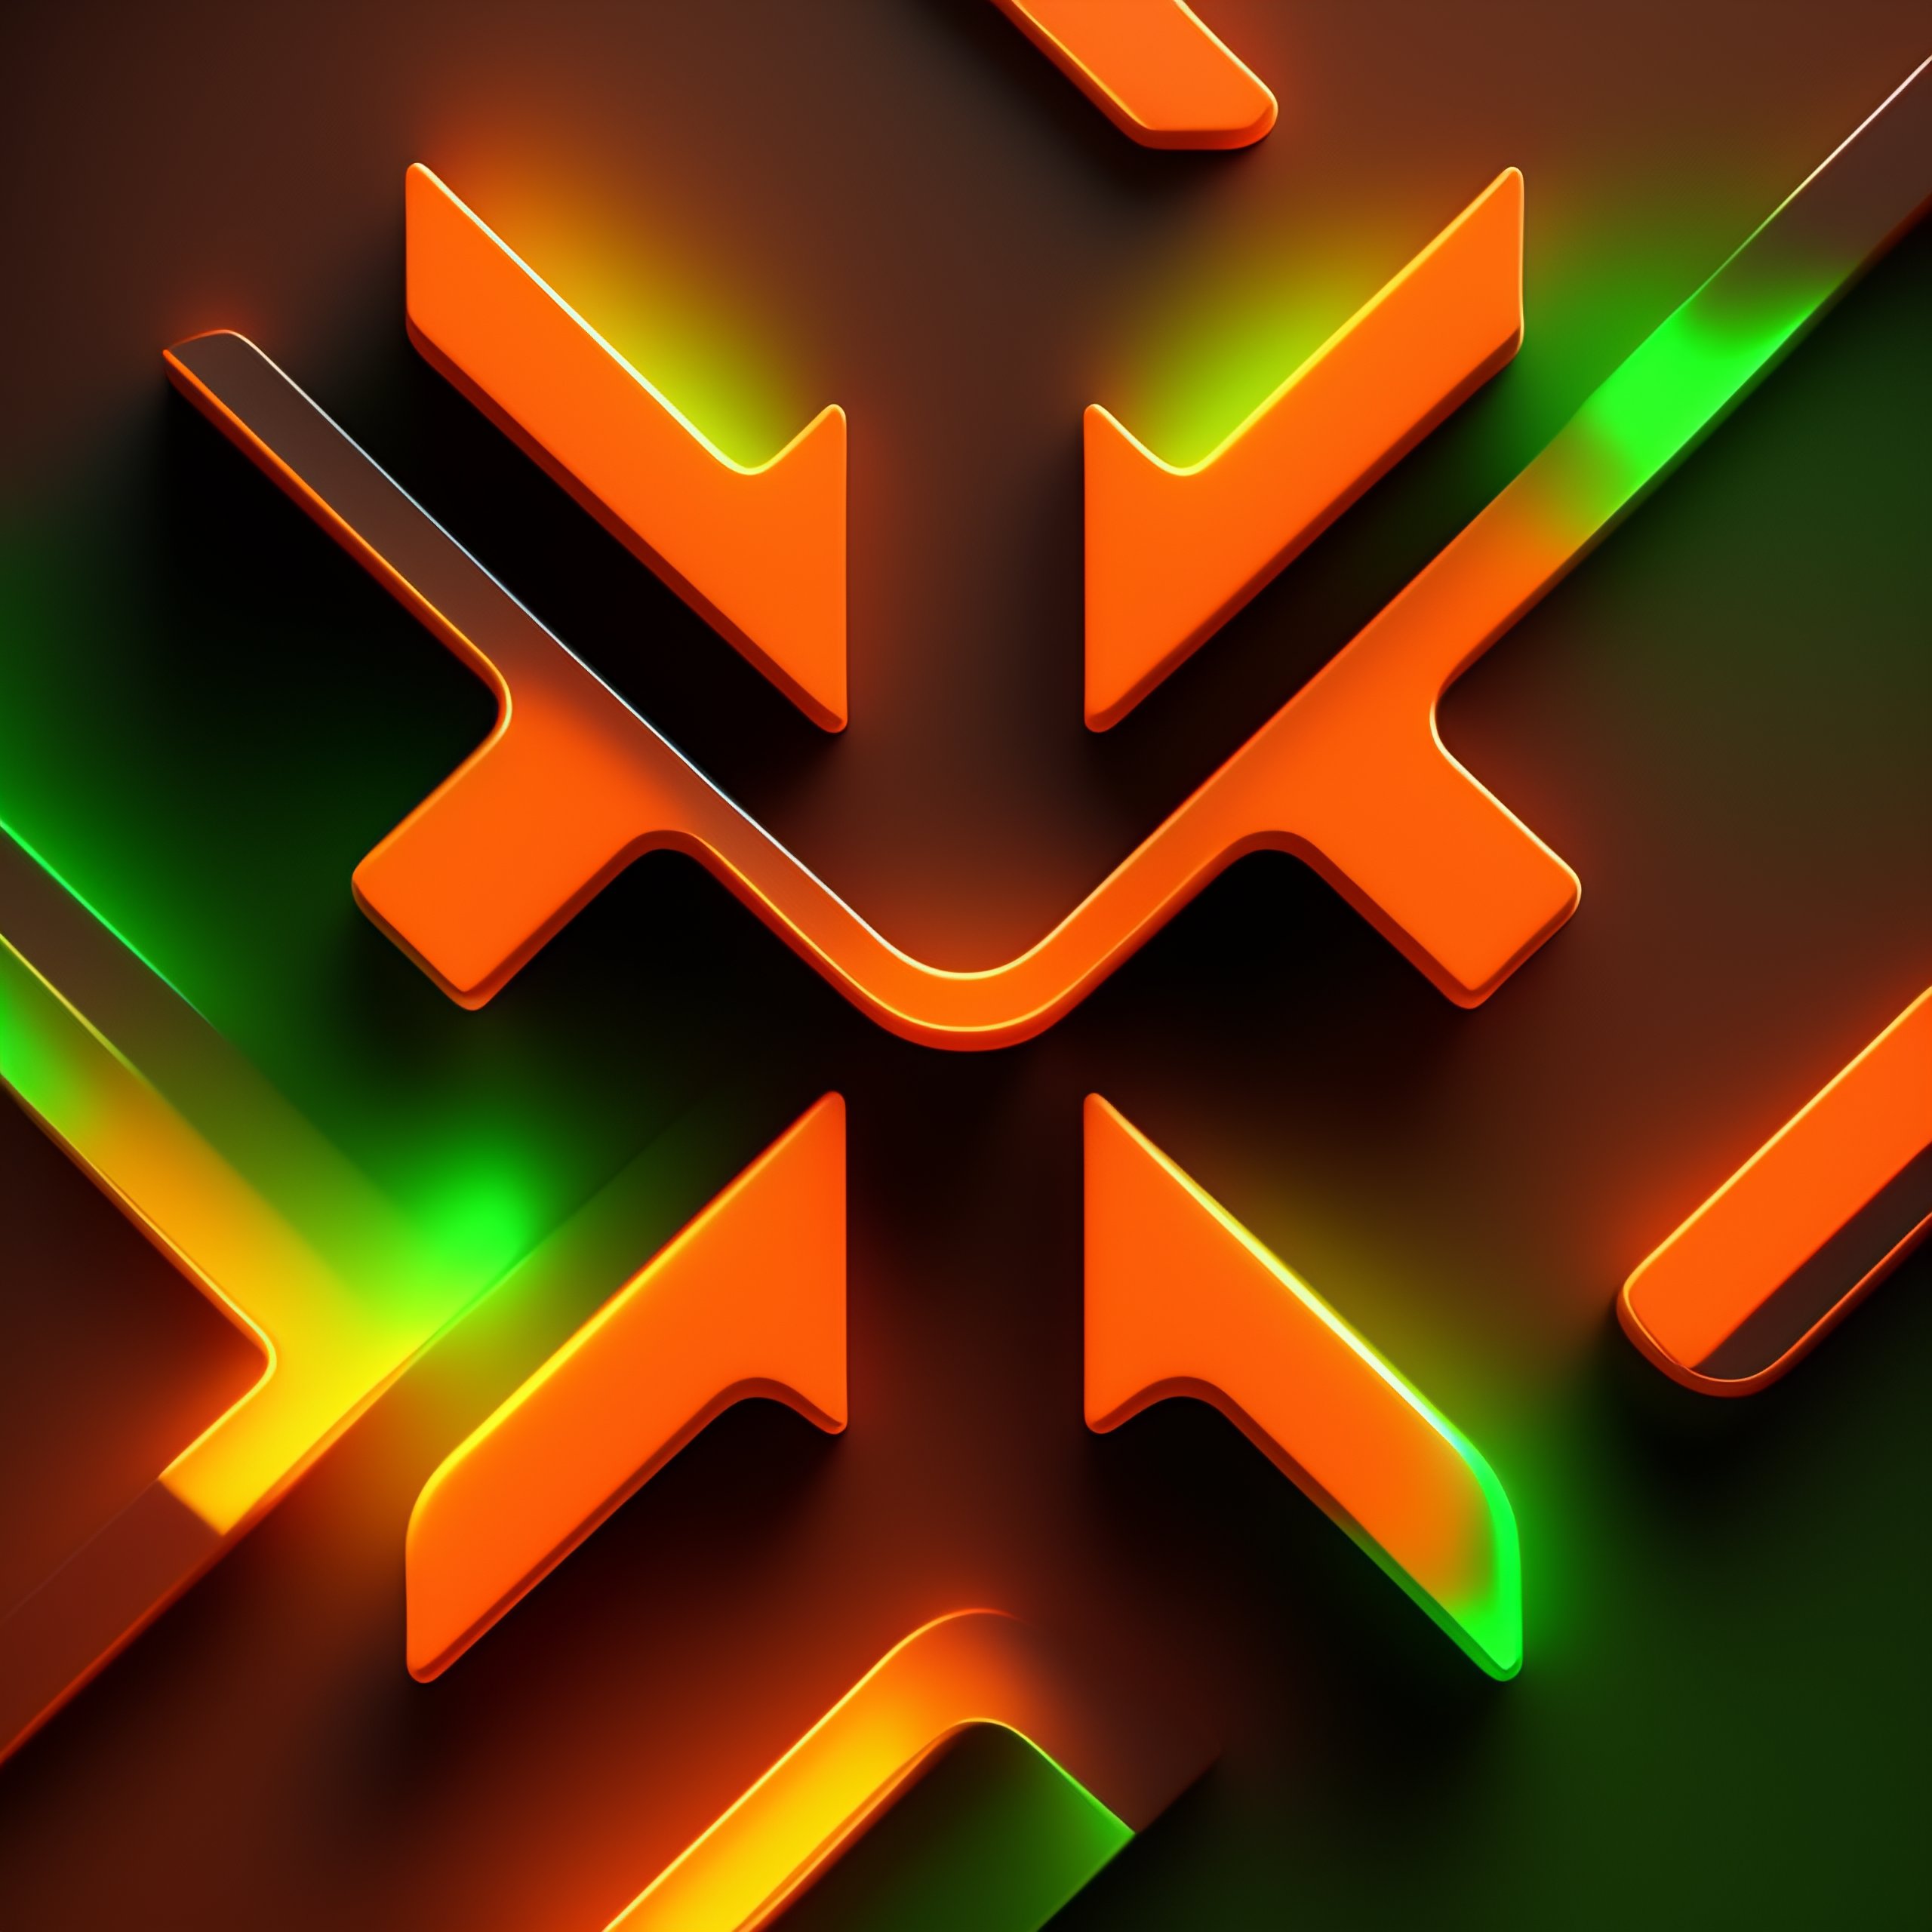 Lexica - CS-GO deluxe symbol for skin collection, hollographic orange and green  neon details color, Knolling layout, Highly detailed, Depth, Lumen re